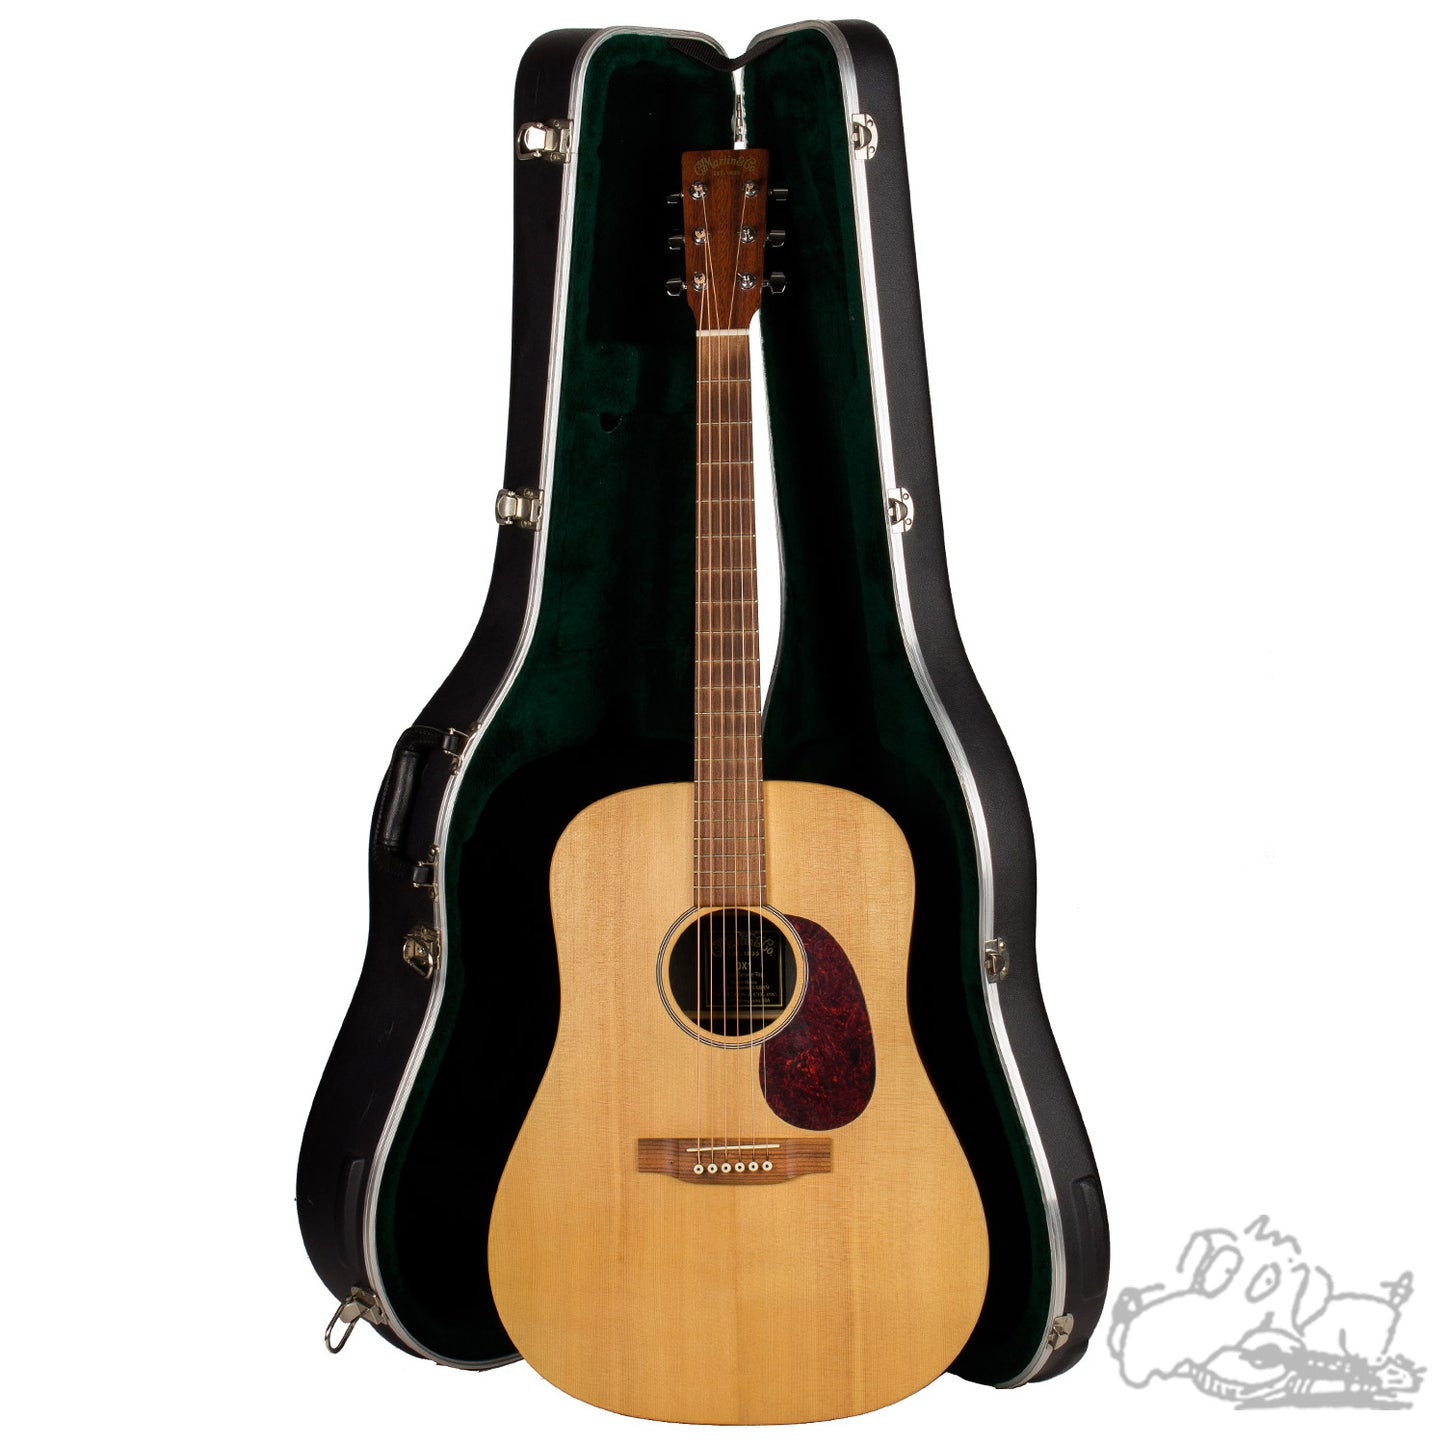 Previously Owned 2006 Martin DX-1